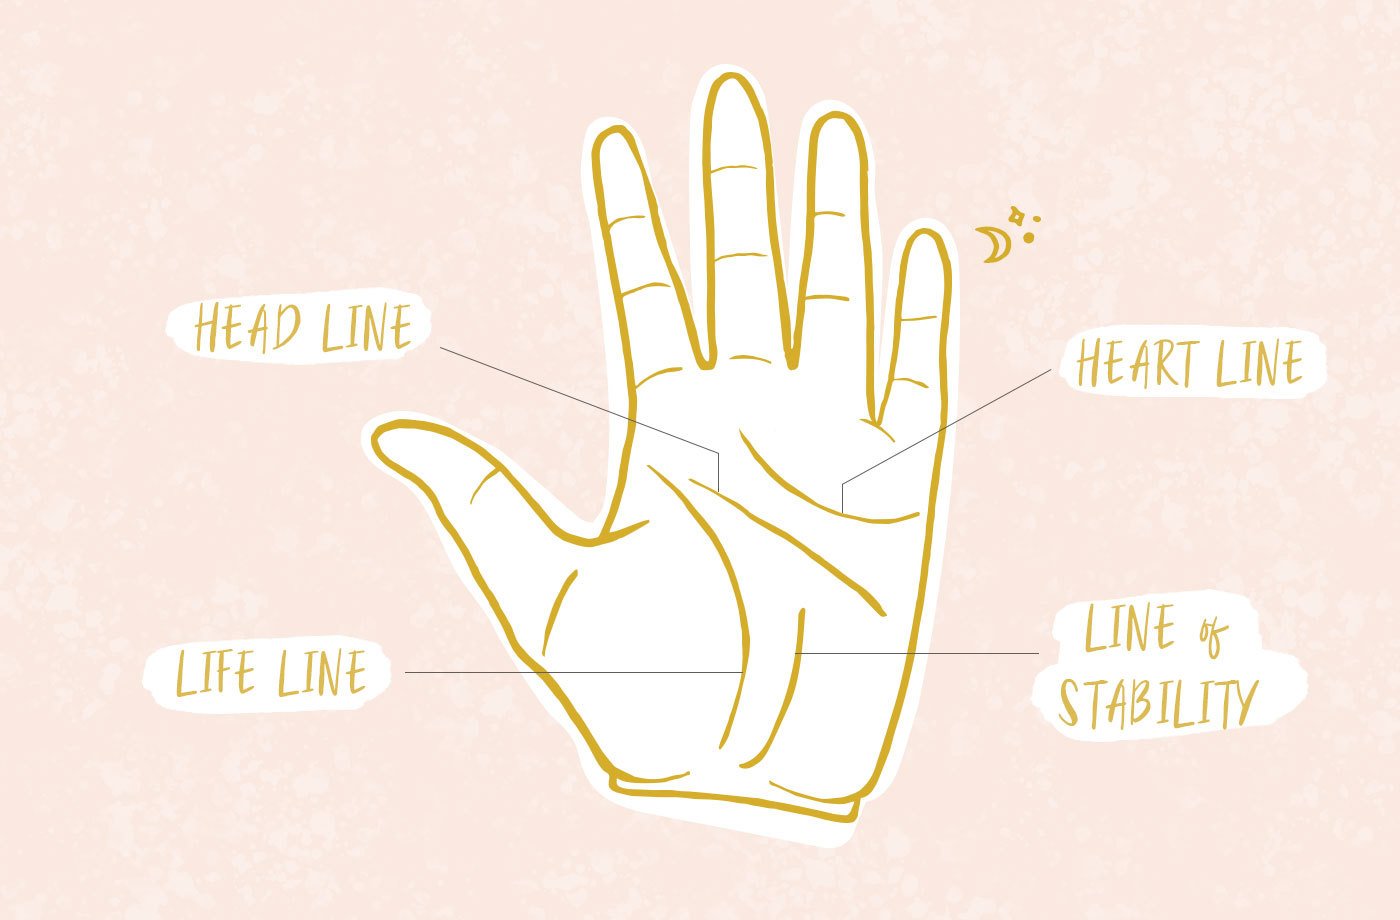 How to read palms and understand what palm lines mean